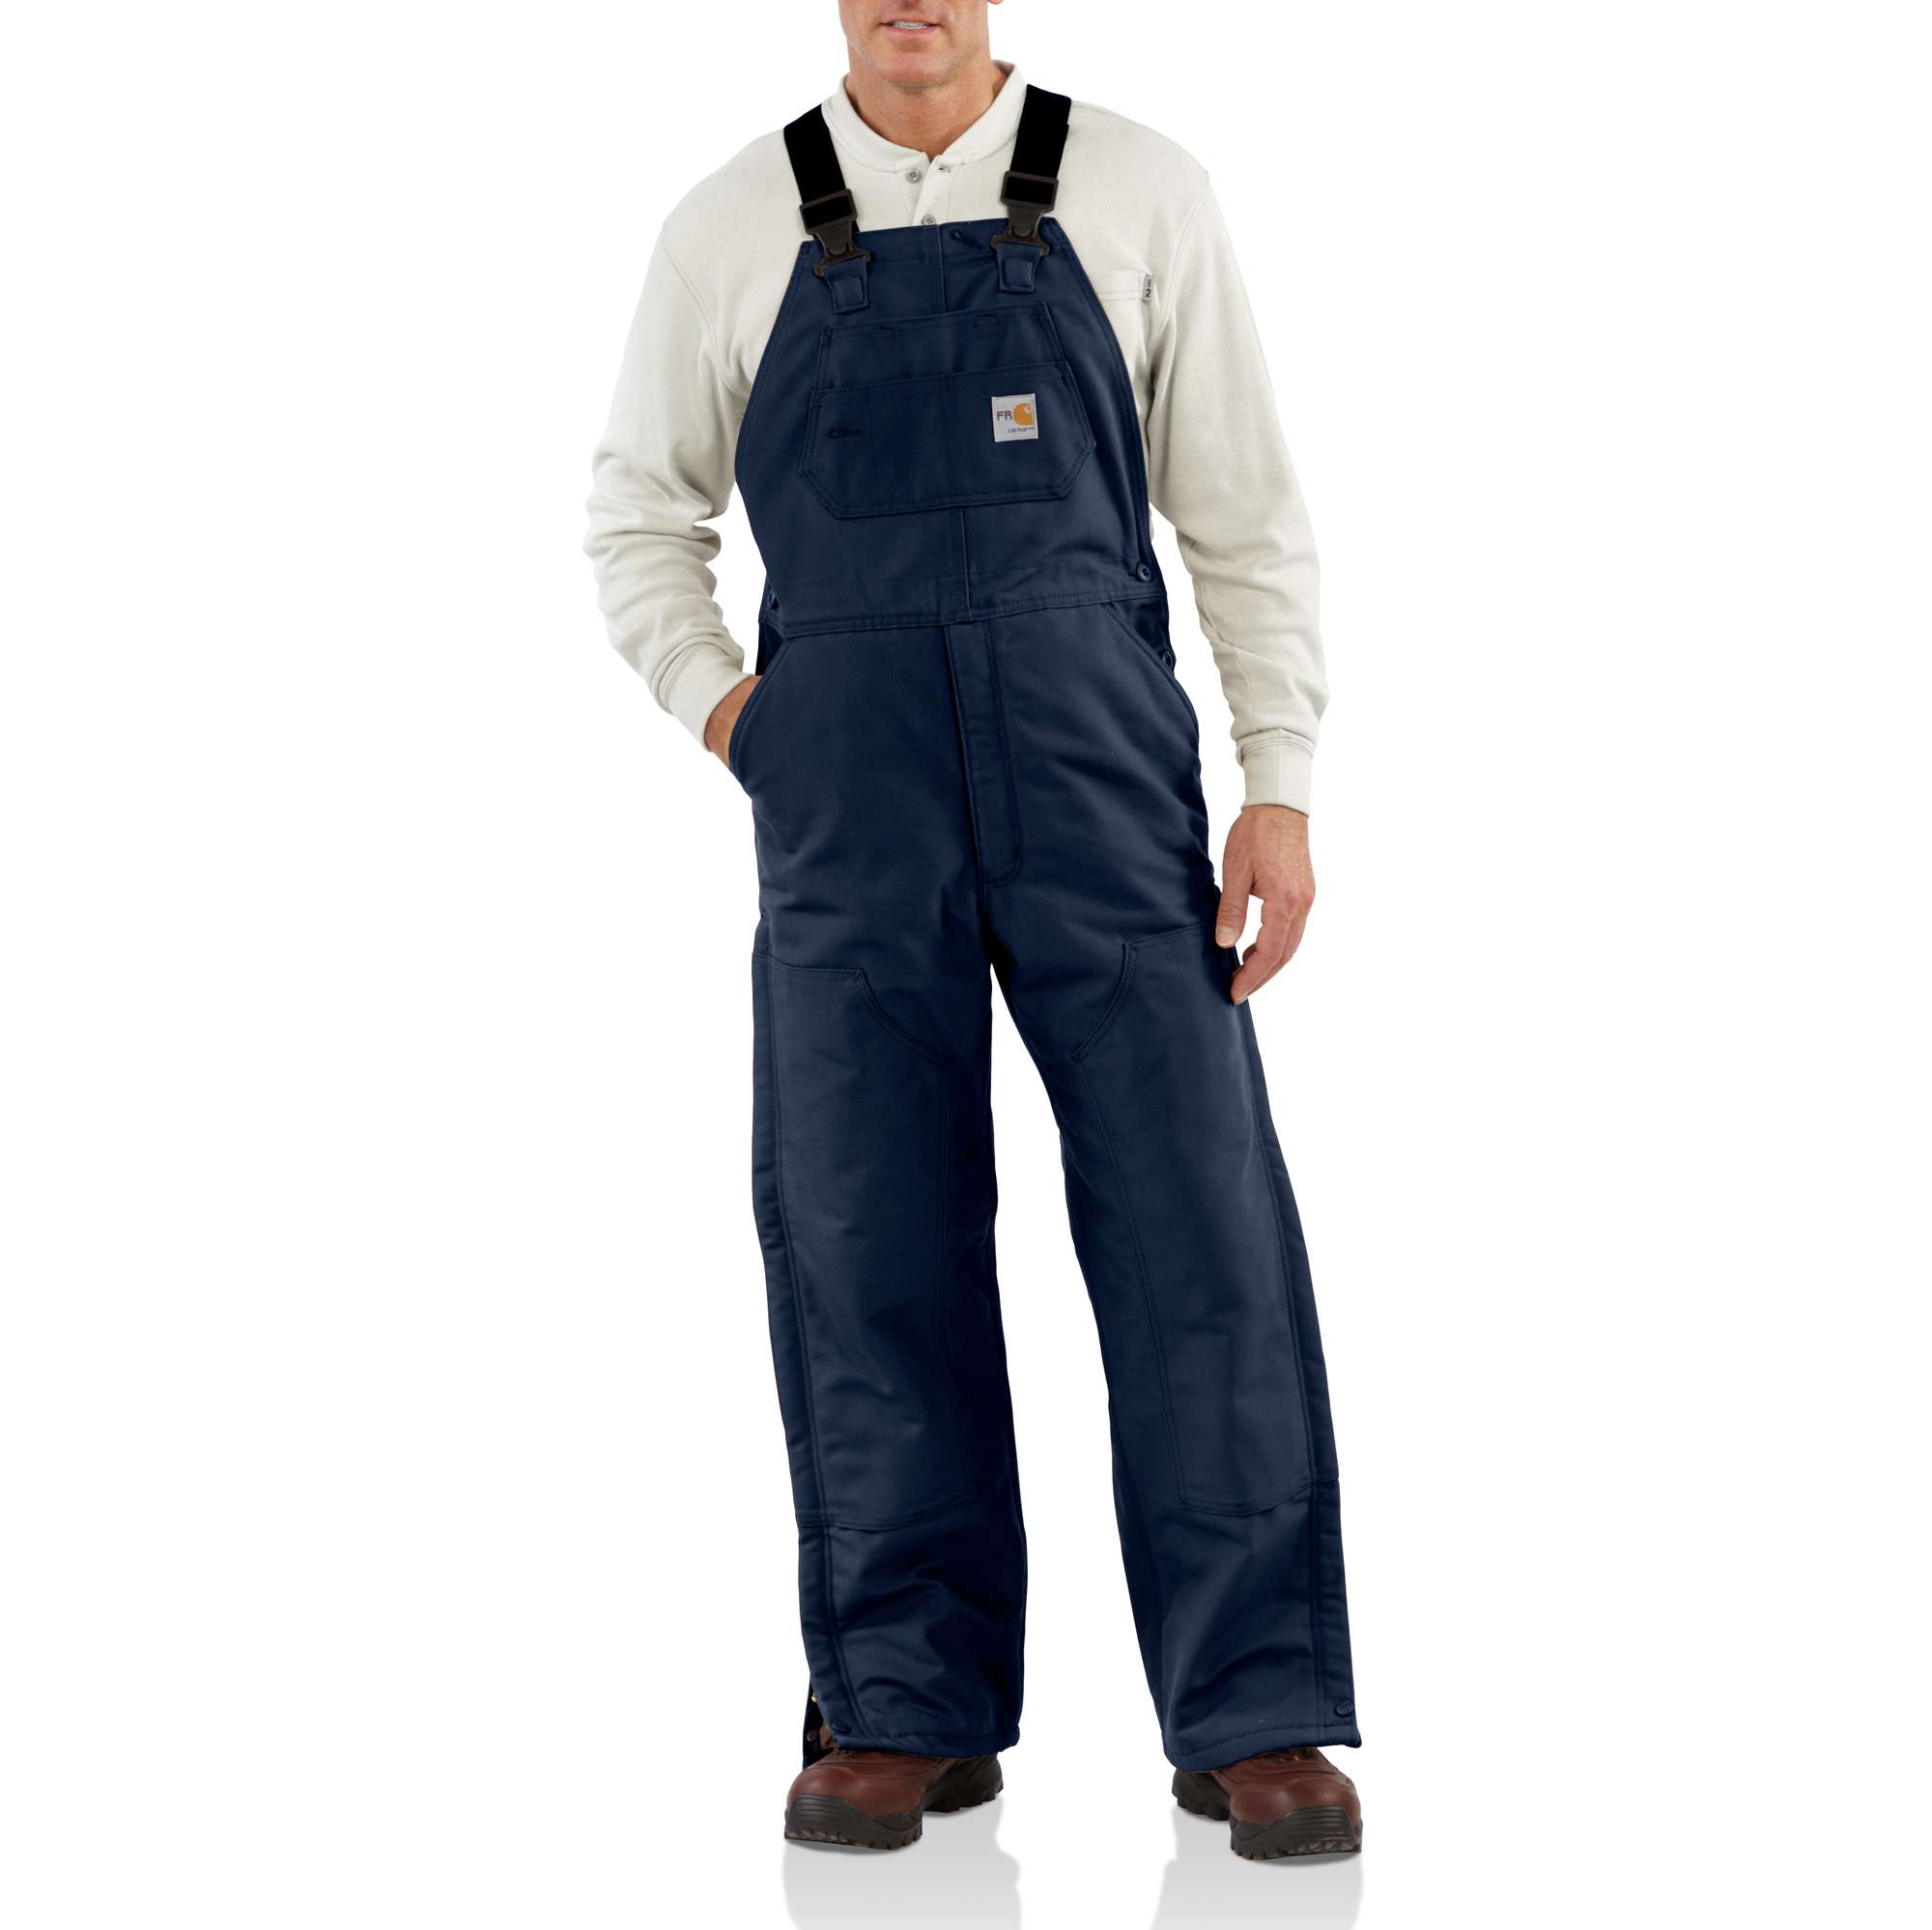 Men’s Flame-Resistant Duck Bib Overall/Quilt Lined